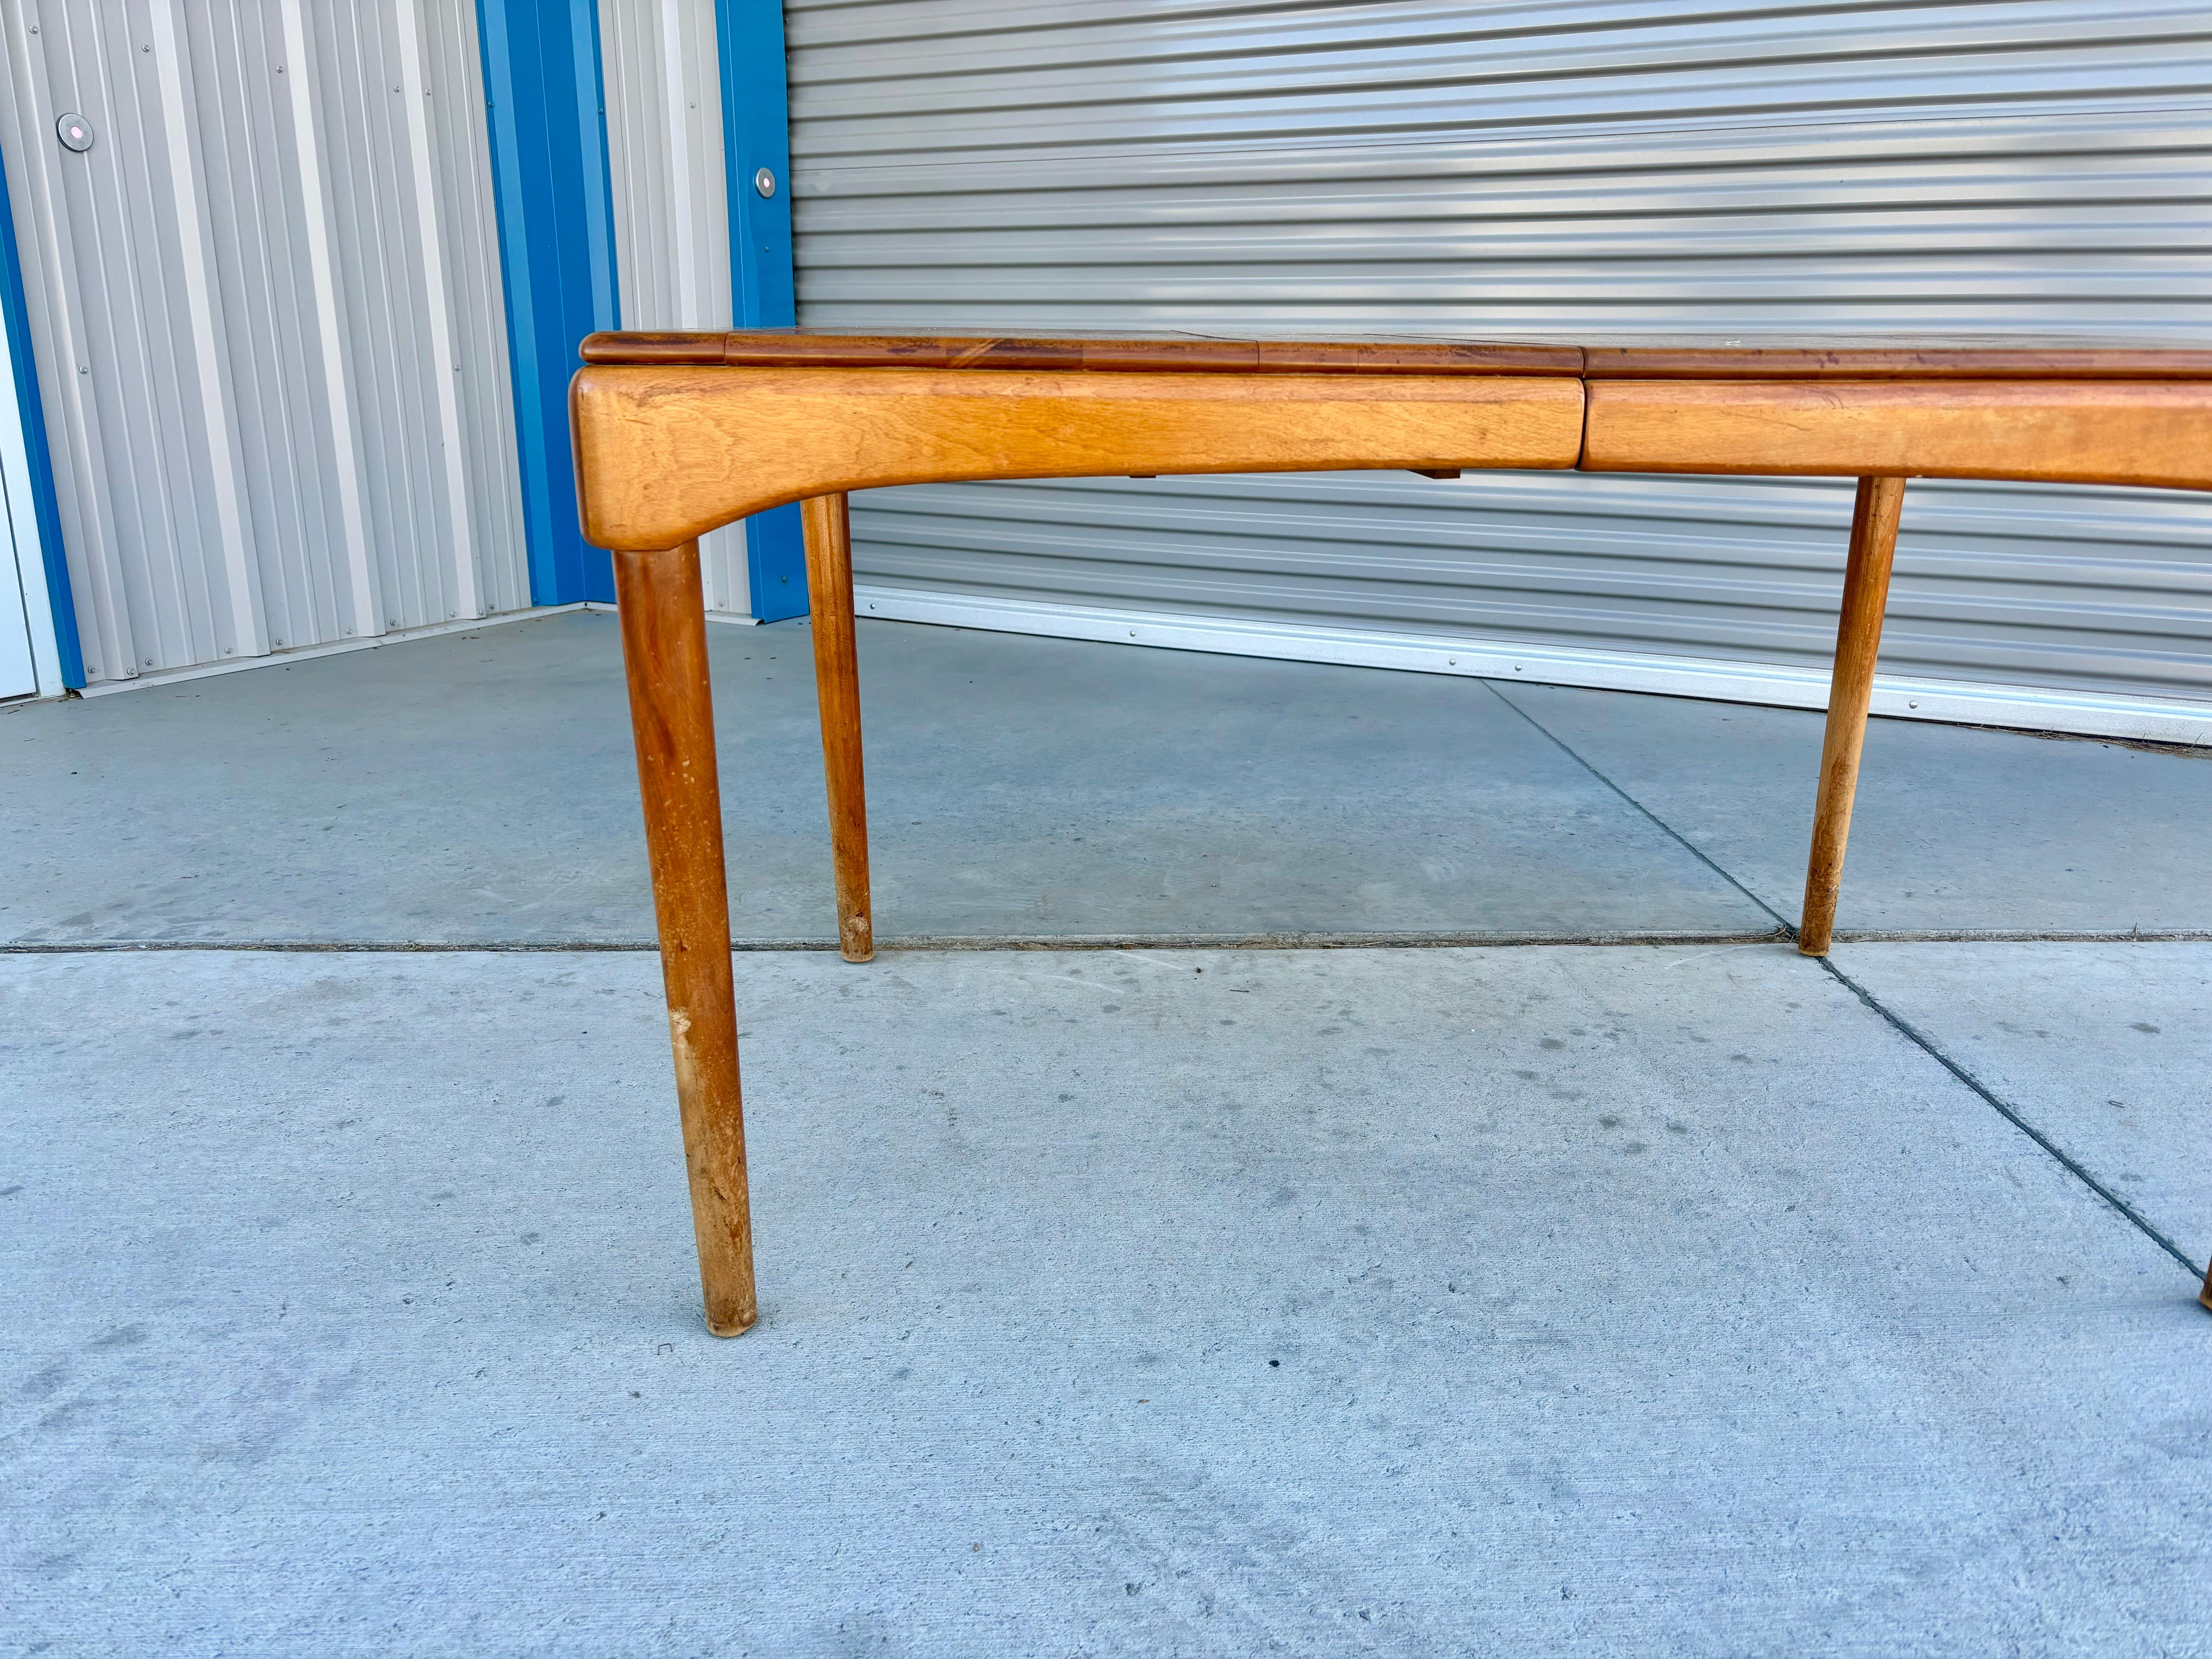 This mid-century maple dining table was designed and manufactured by Heywood Wakefield in the United States circa 1960s. This beautiful dining table features a maple frame. The table also has an extra leaf, providing ample space for last-minute